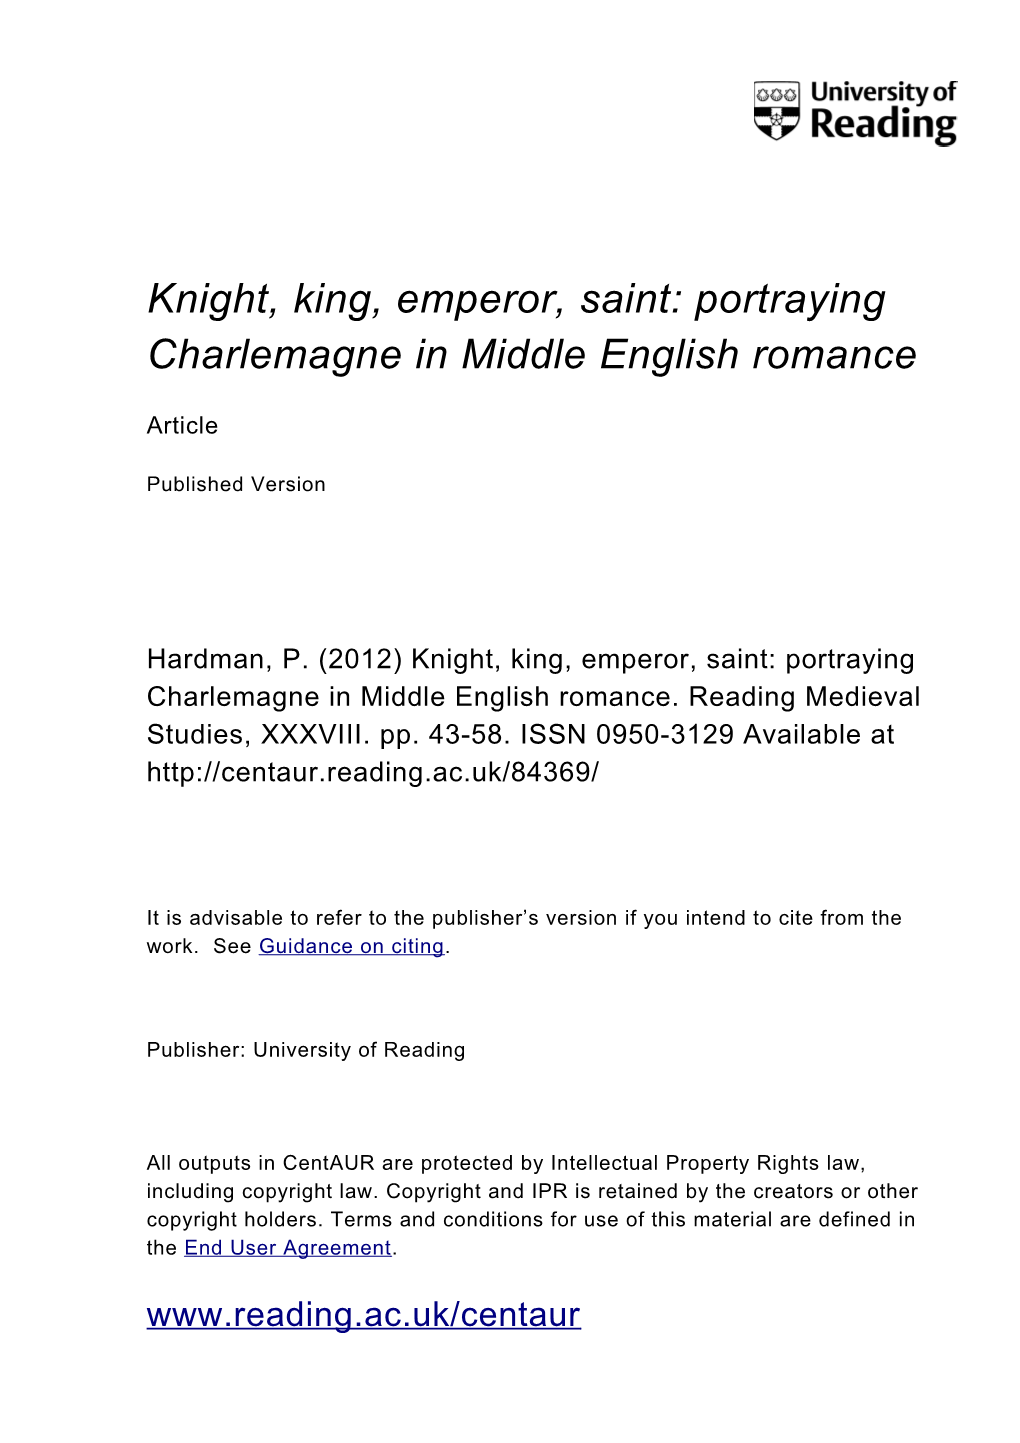 Knight, King, Emperor, Saint: Portraying Charlemagne in Middle English Romance